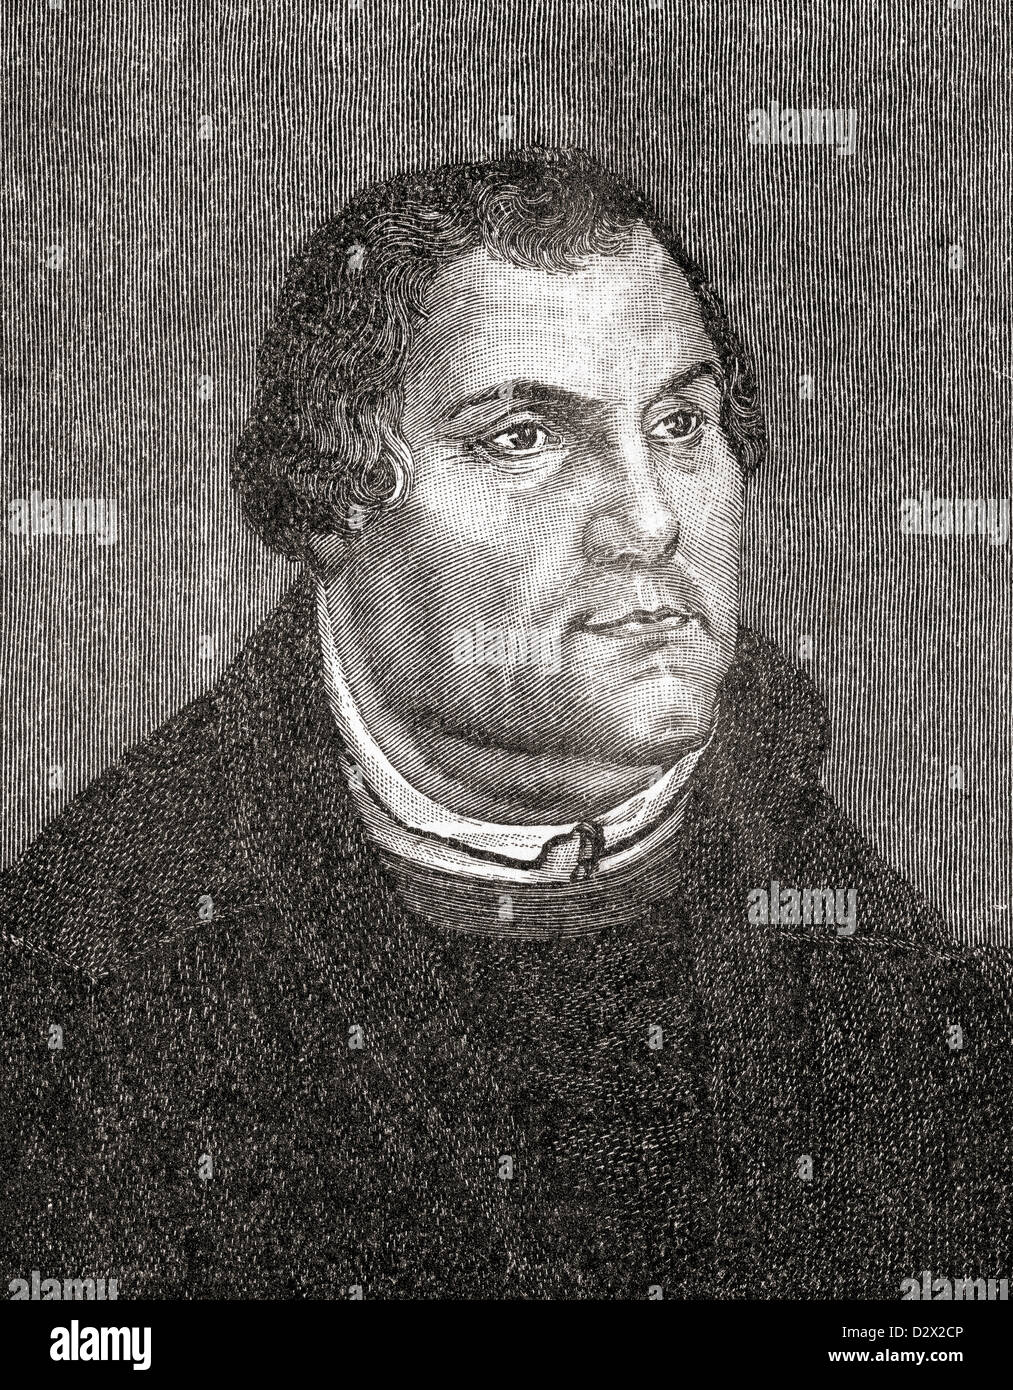 Martin Luther, 1483 – 1546. German monk, priest and professor of theology. From A First Book of British History published 1925. Stock Photo